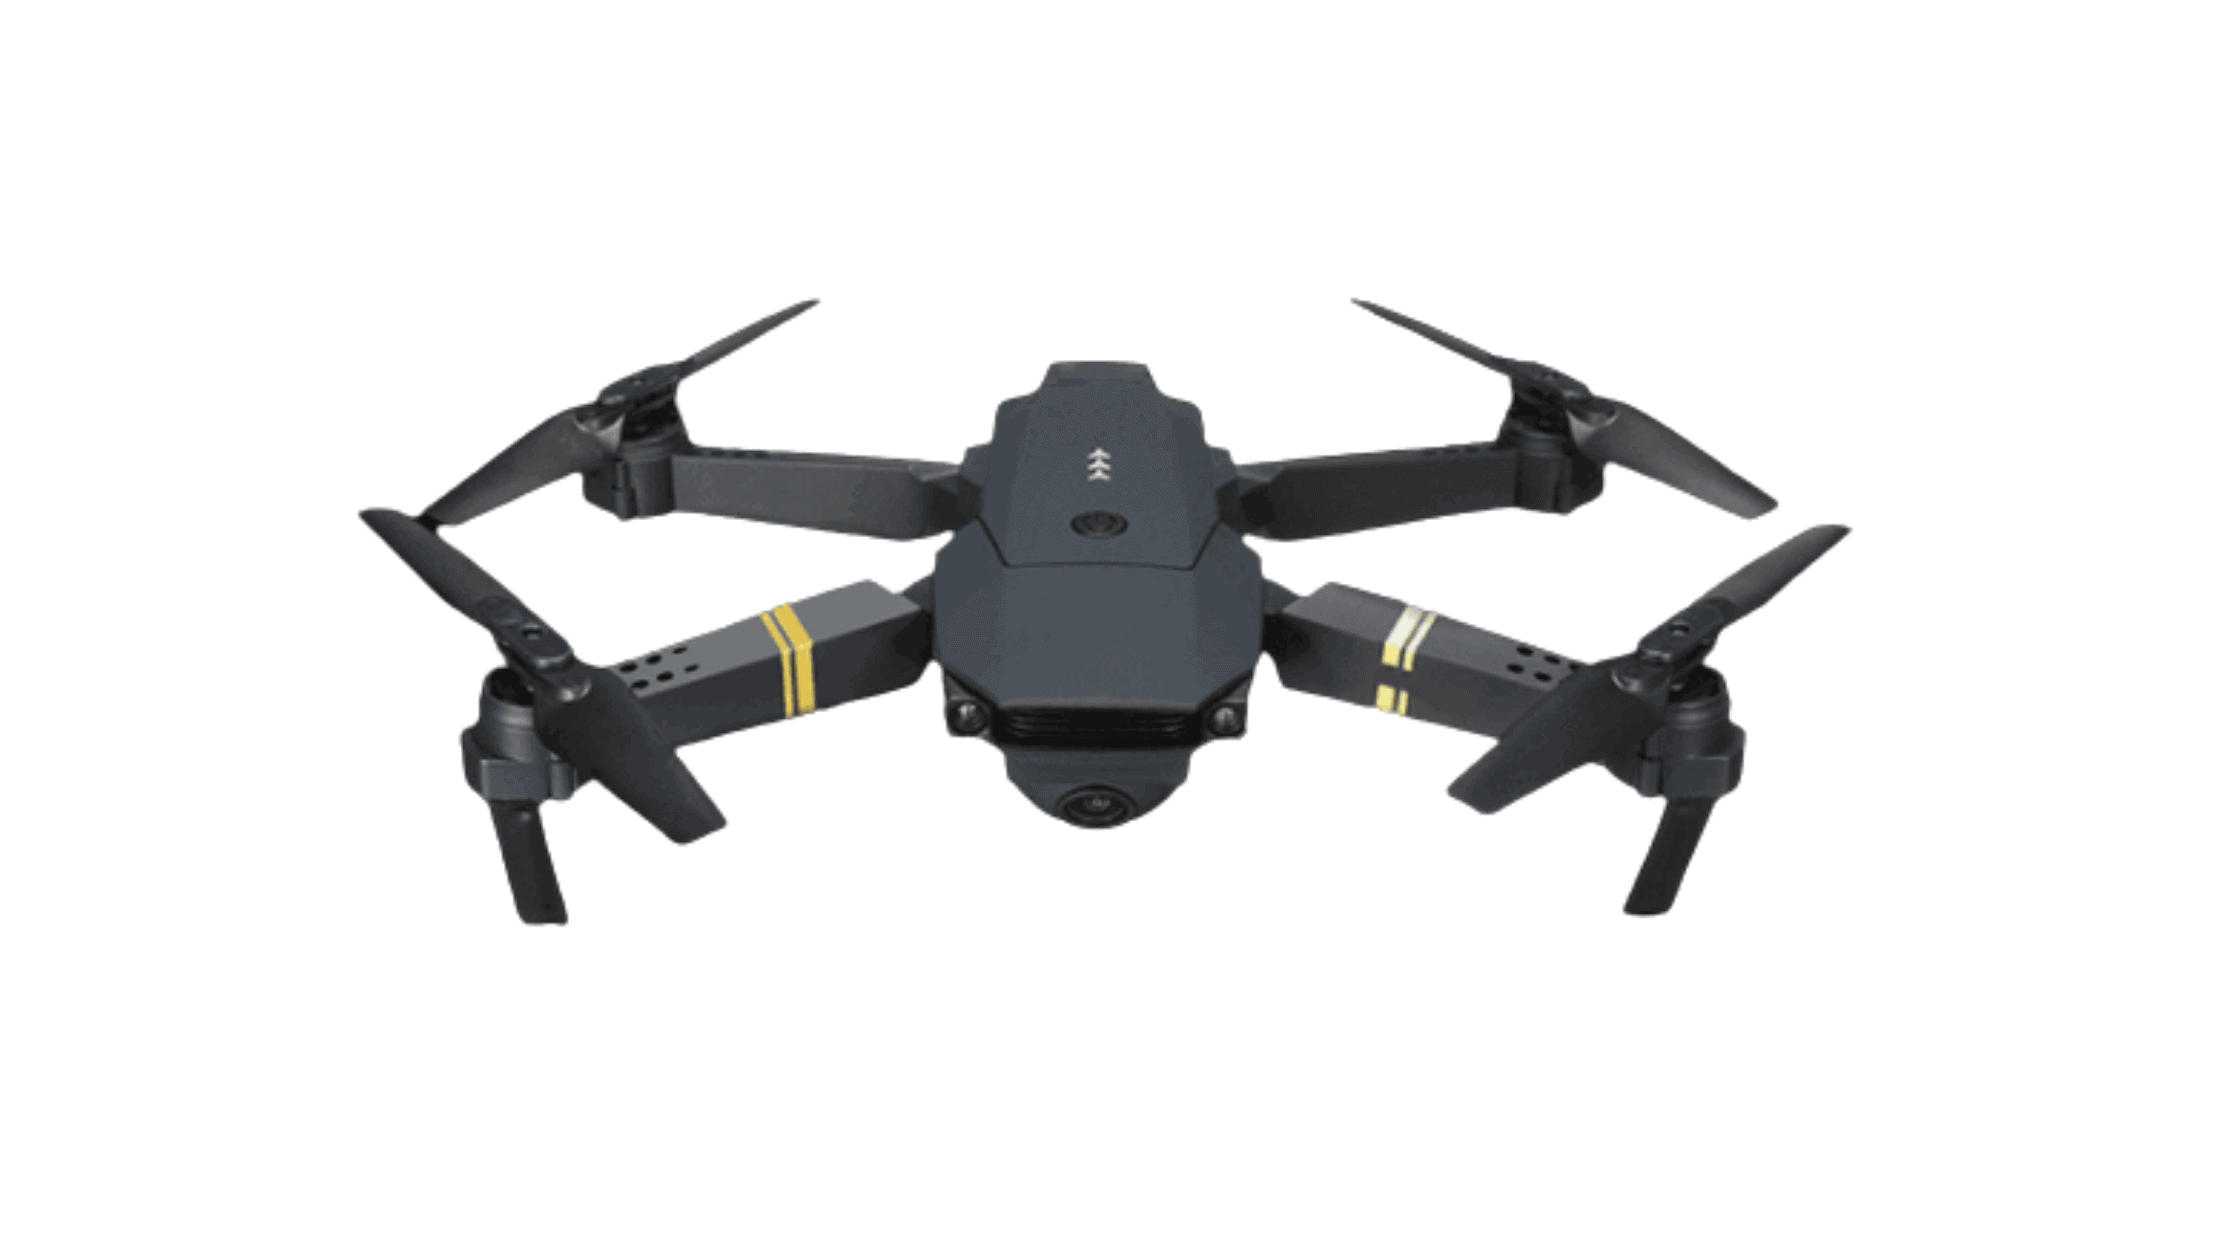 QuadAir Drone Reviews - Is This Weightless Foldable Drone Legitimate?